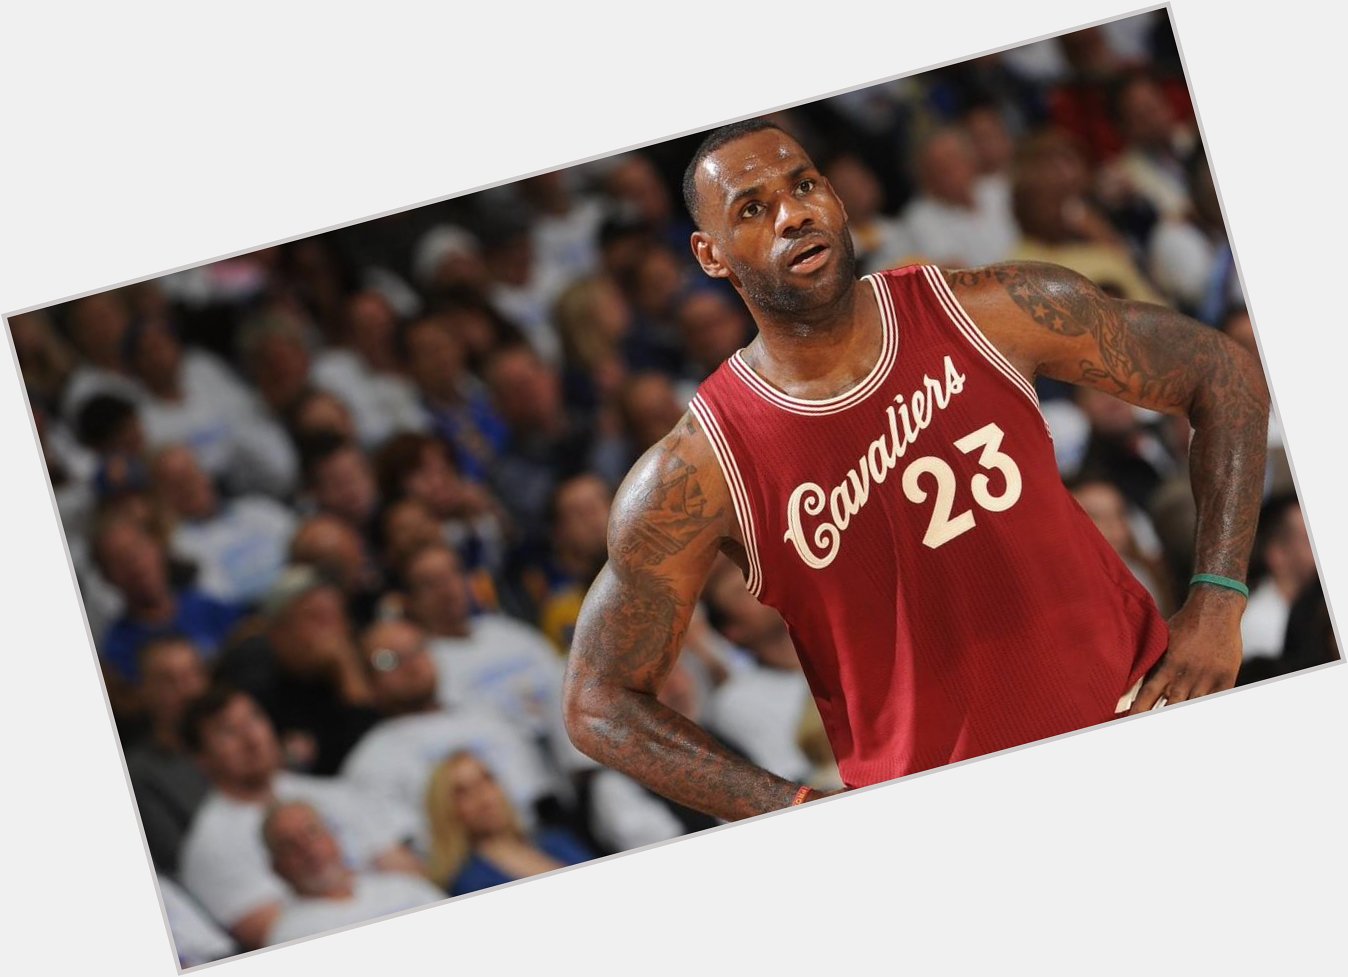 Happy 31st Birthday, Look back at some LeBron\s biggest moments. 

MORE:  